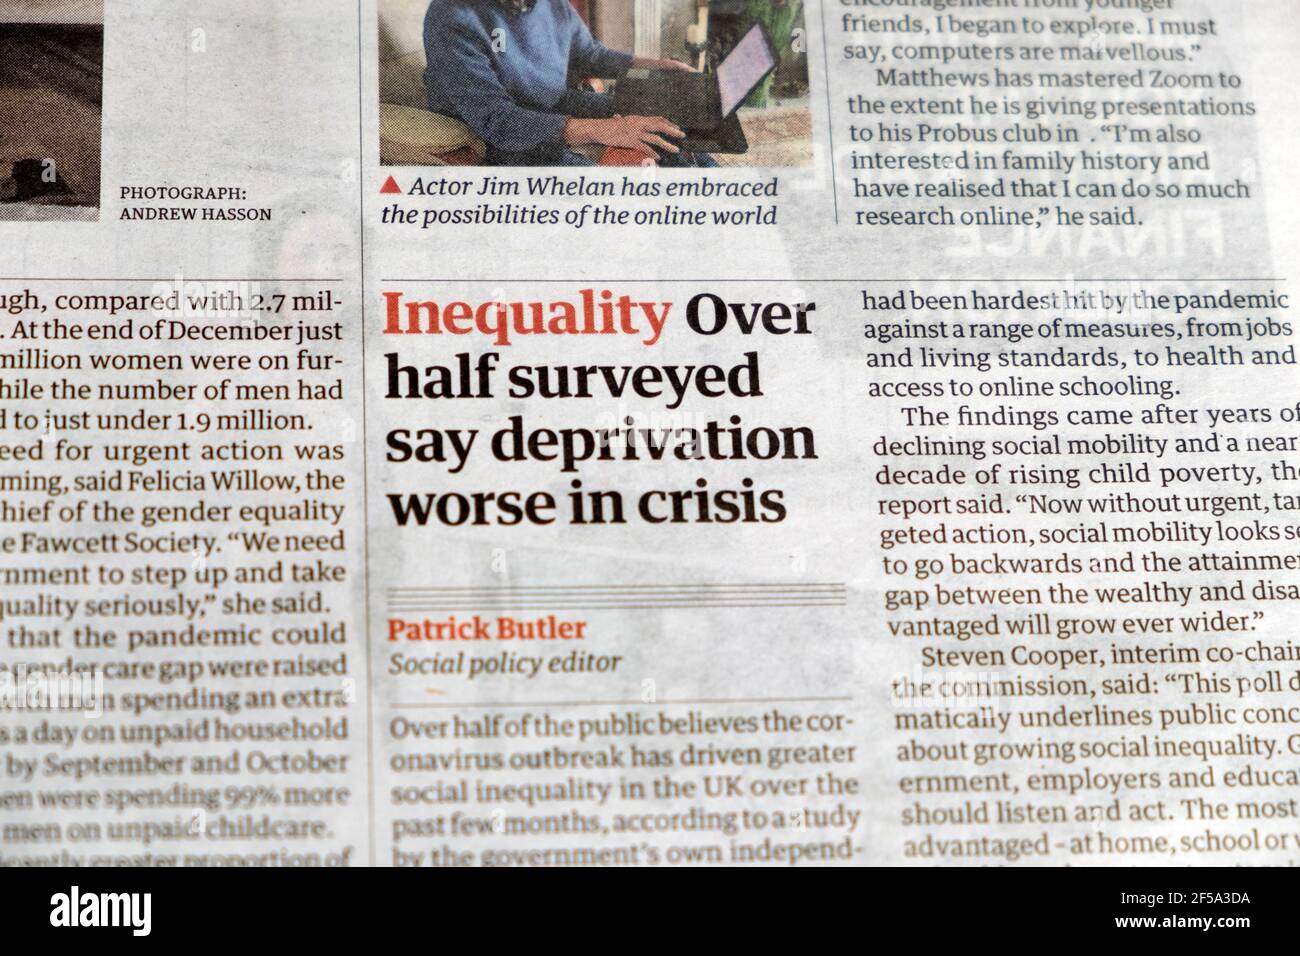 'Inequality Over half surveyed say deprivation worse in crisis' Guardian newspaper headline Covid 19 article on 11 March 2021 in London UK Stock Photo